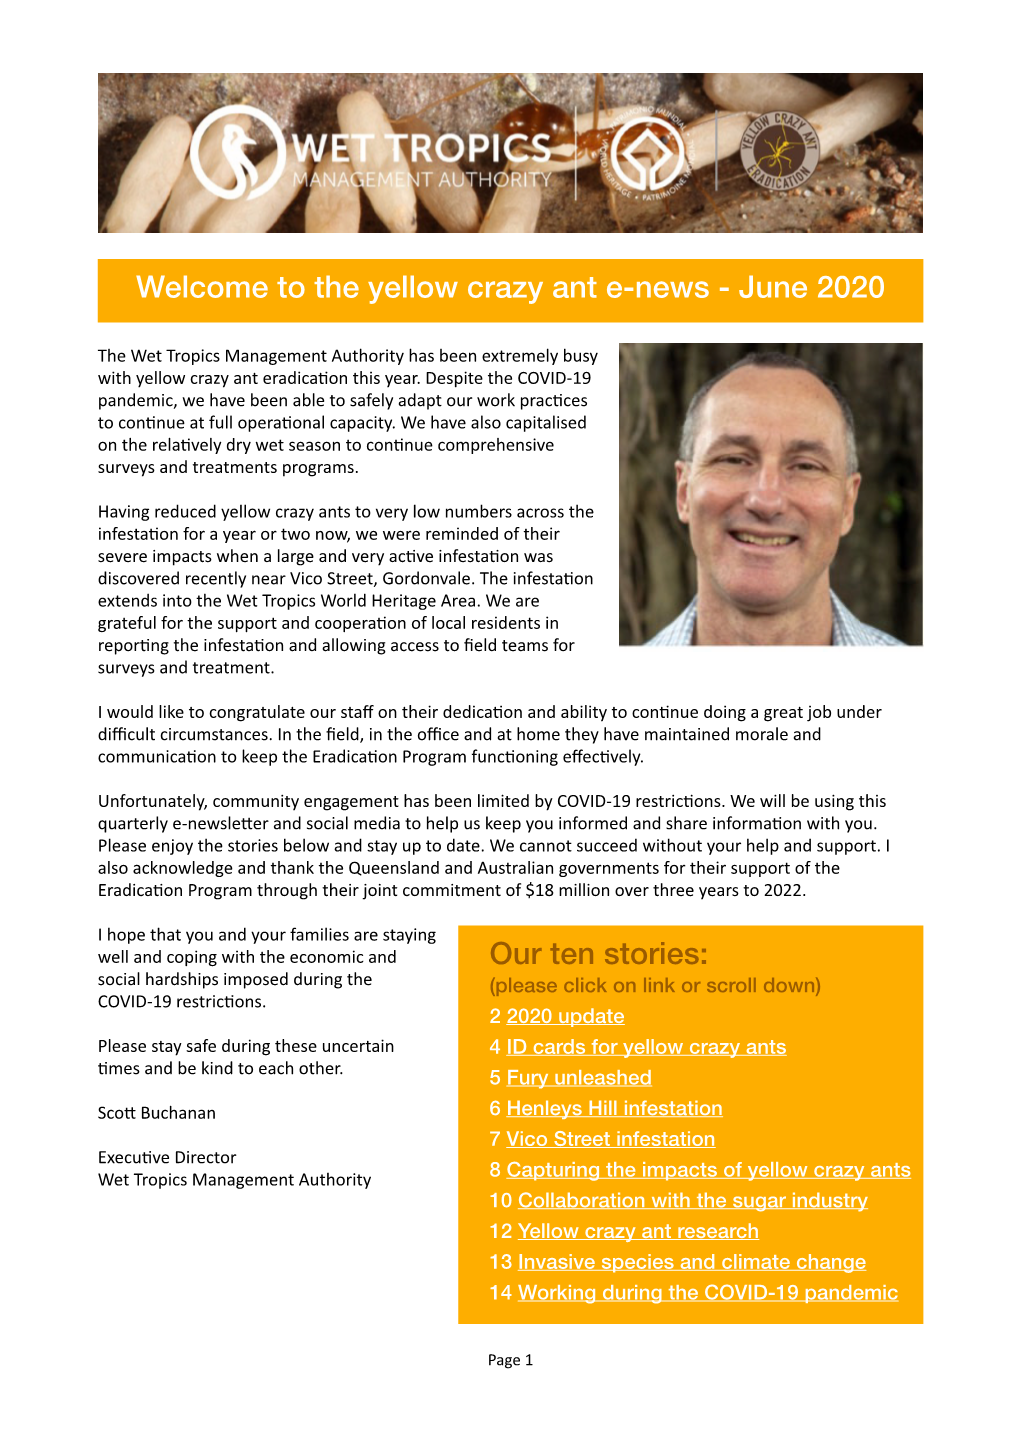 The Yellow Crazy Ant E-News - June 2020